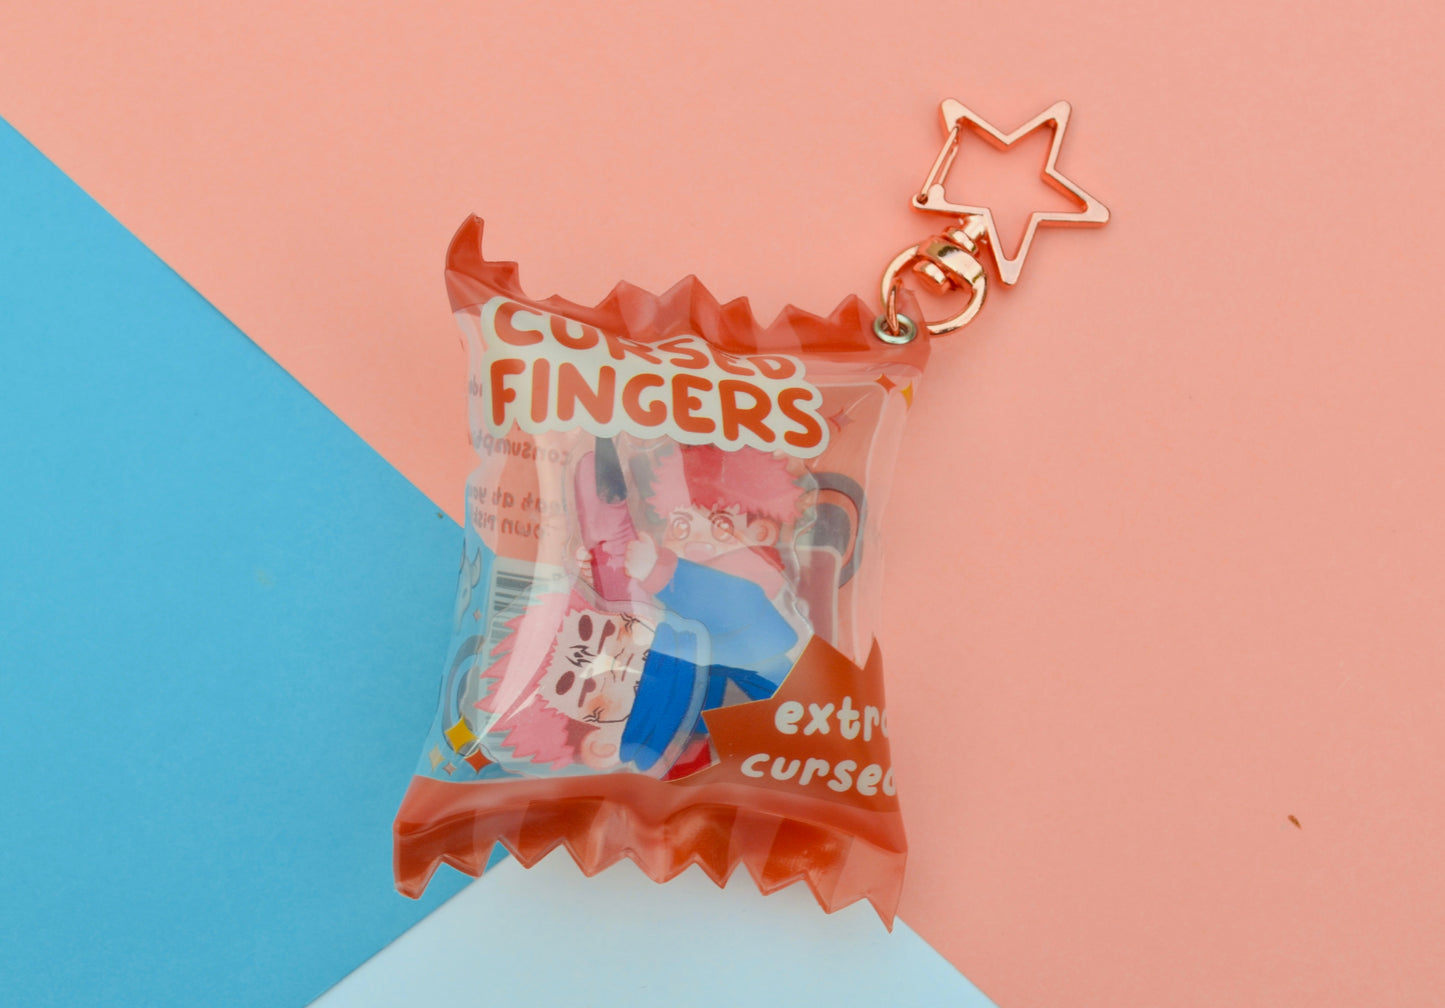 Cursed Fingers Candy Shaker Charm